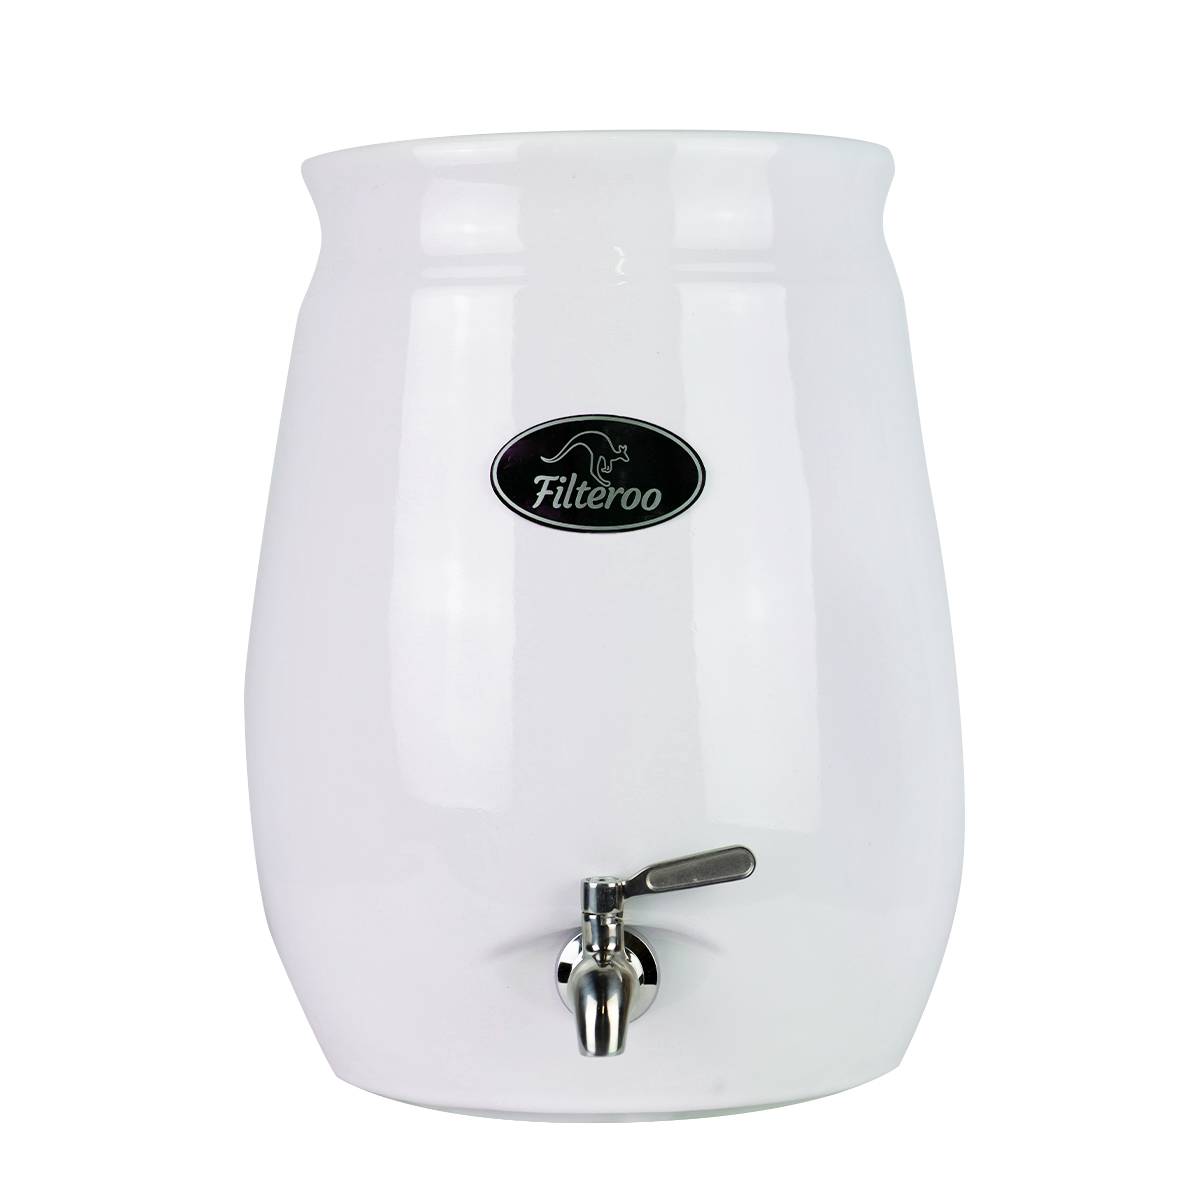 Filteroo® Joey 12L Gravity Ceramic Water Filter with Fluoride Removal